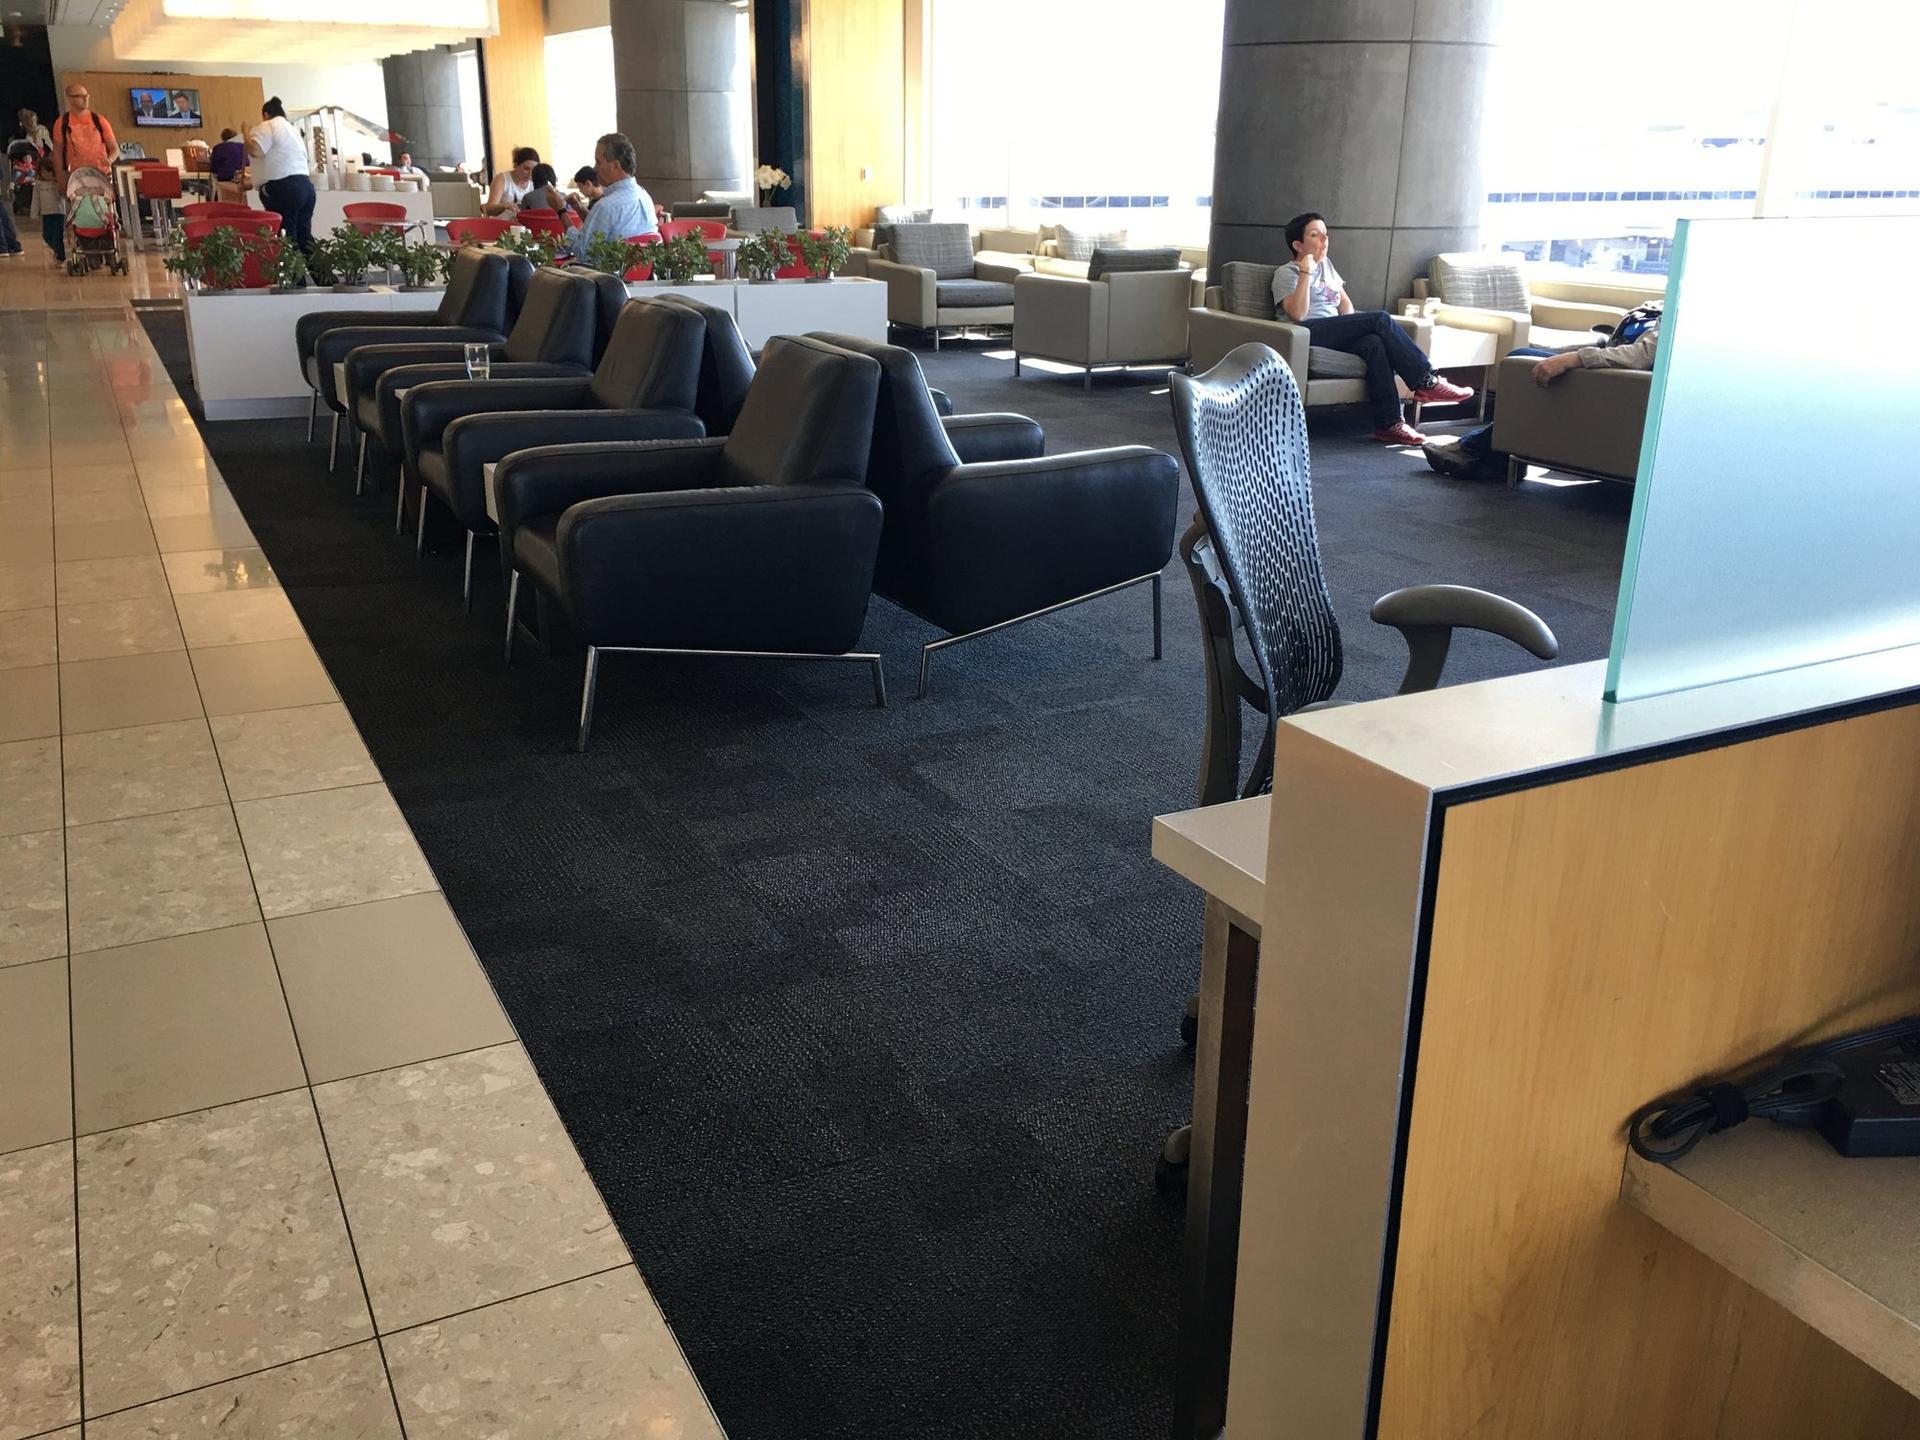 Air Canada Maple Leaf Lounge image 21 of 24